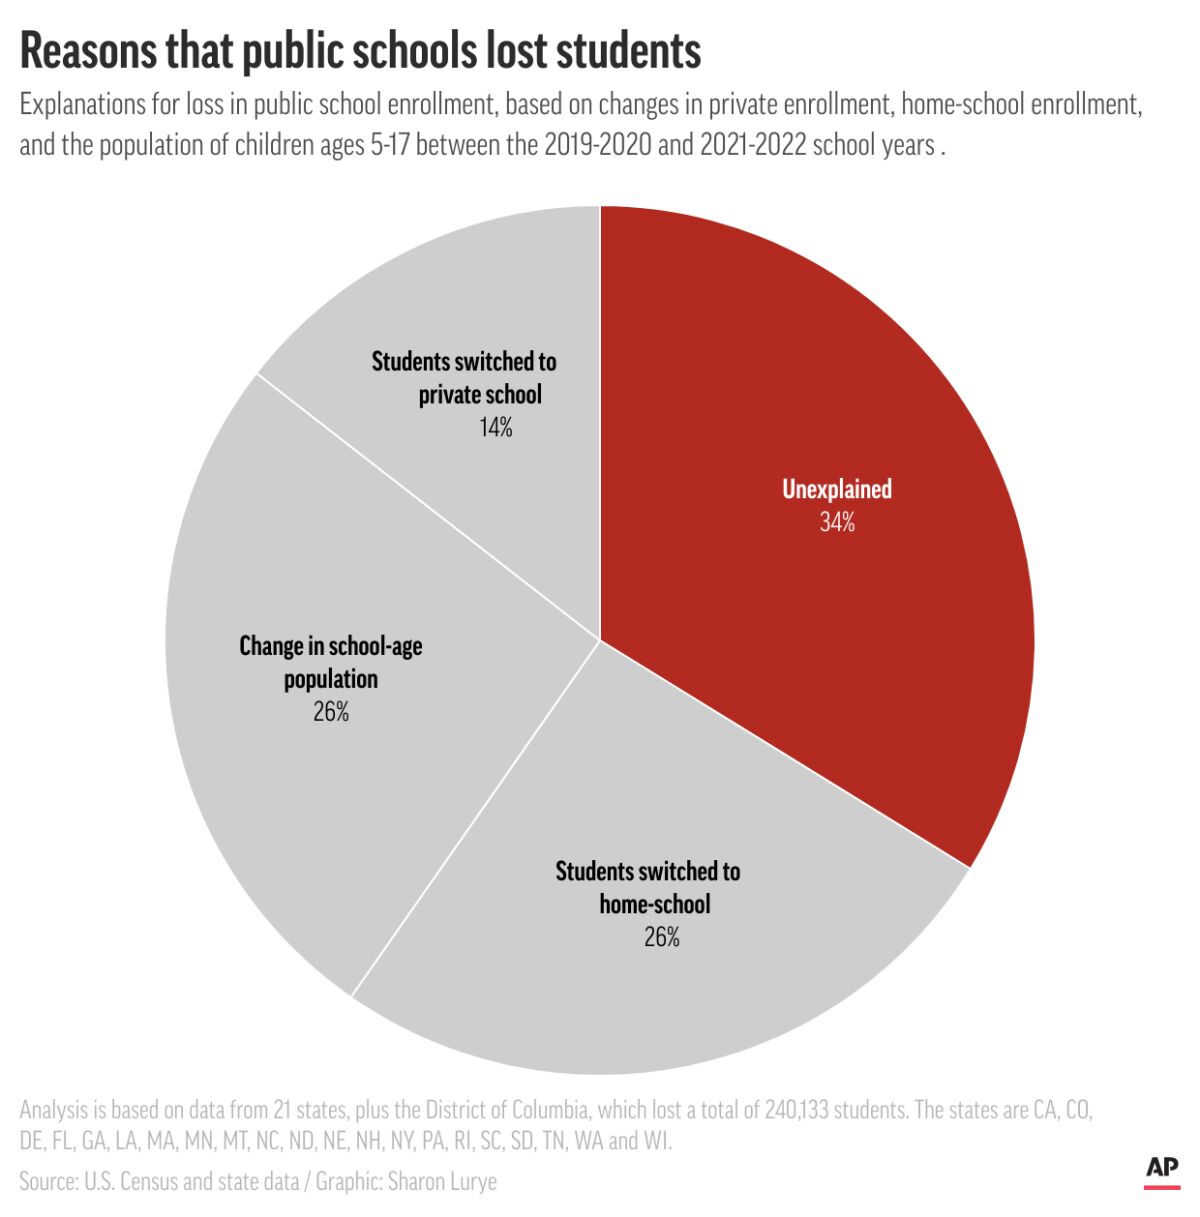 A pie chart of reasons that public schools lost students.